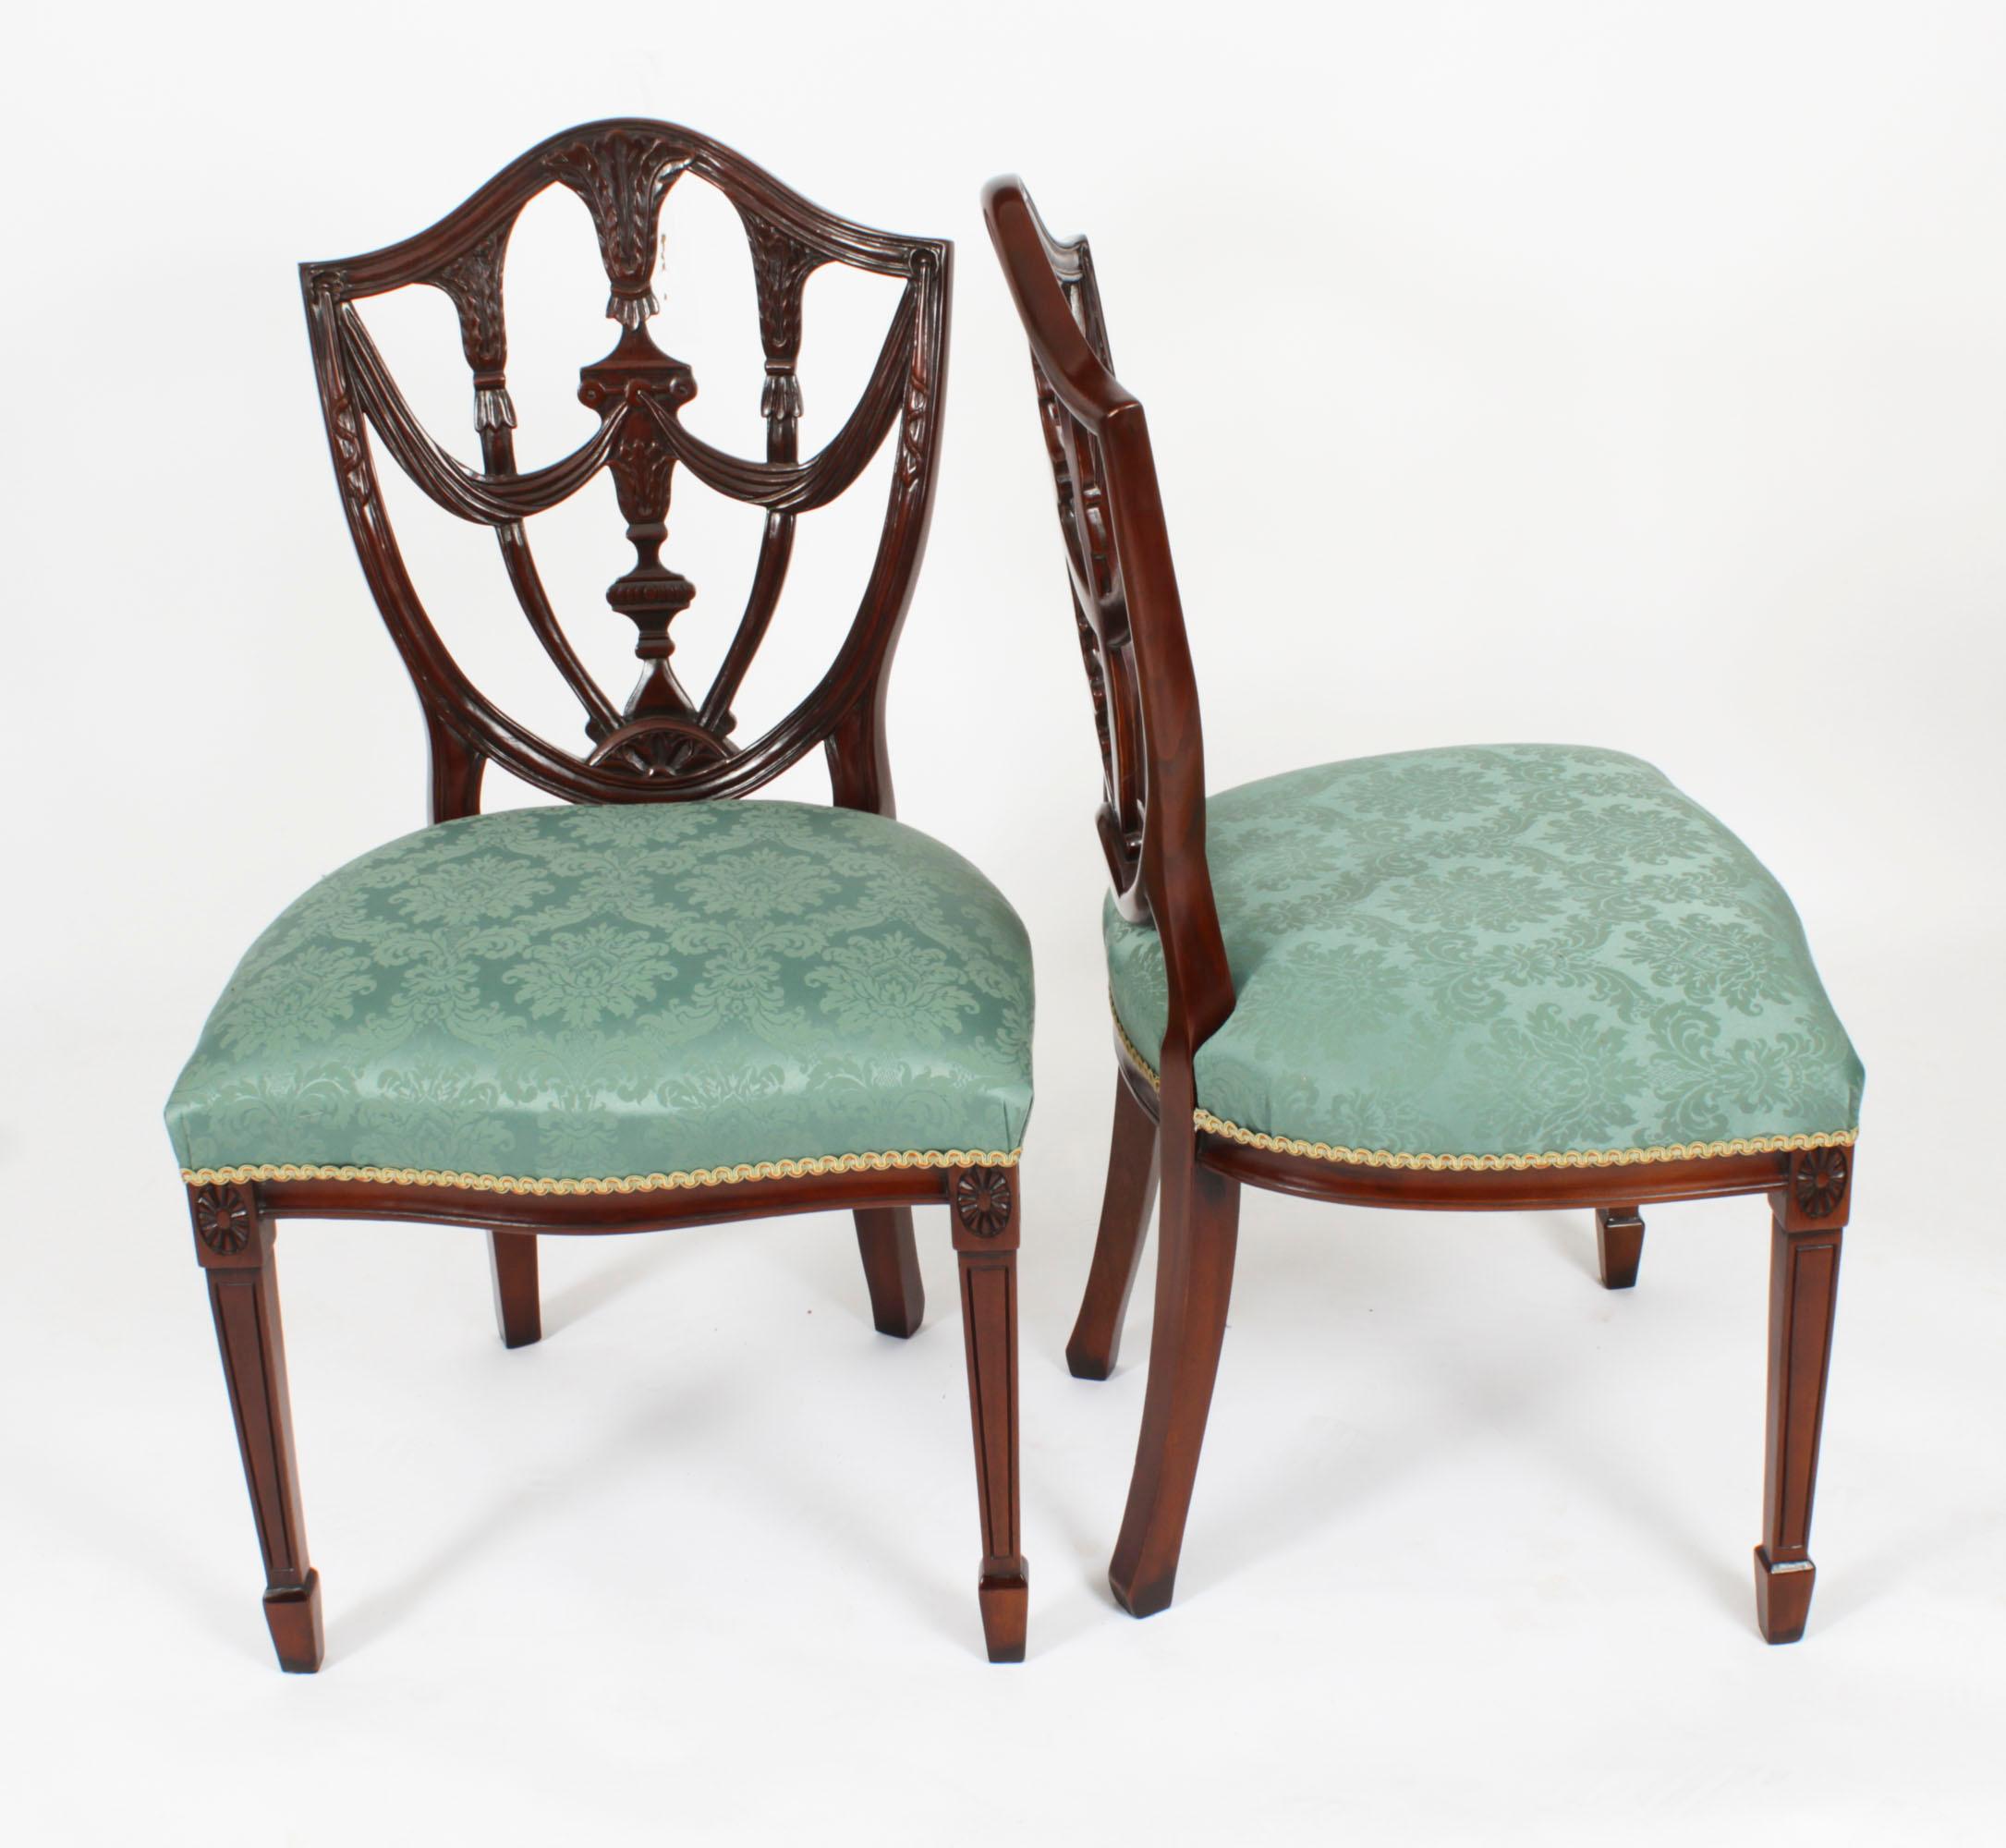 This is an absolutely fantastic vintage set of twelve Federal Revival shield back dining chairs, dating from the second half of the 20th century.

These chairs have been masterfully crafted in beautiful solid mahogany with hand carved decoration